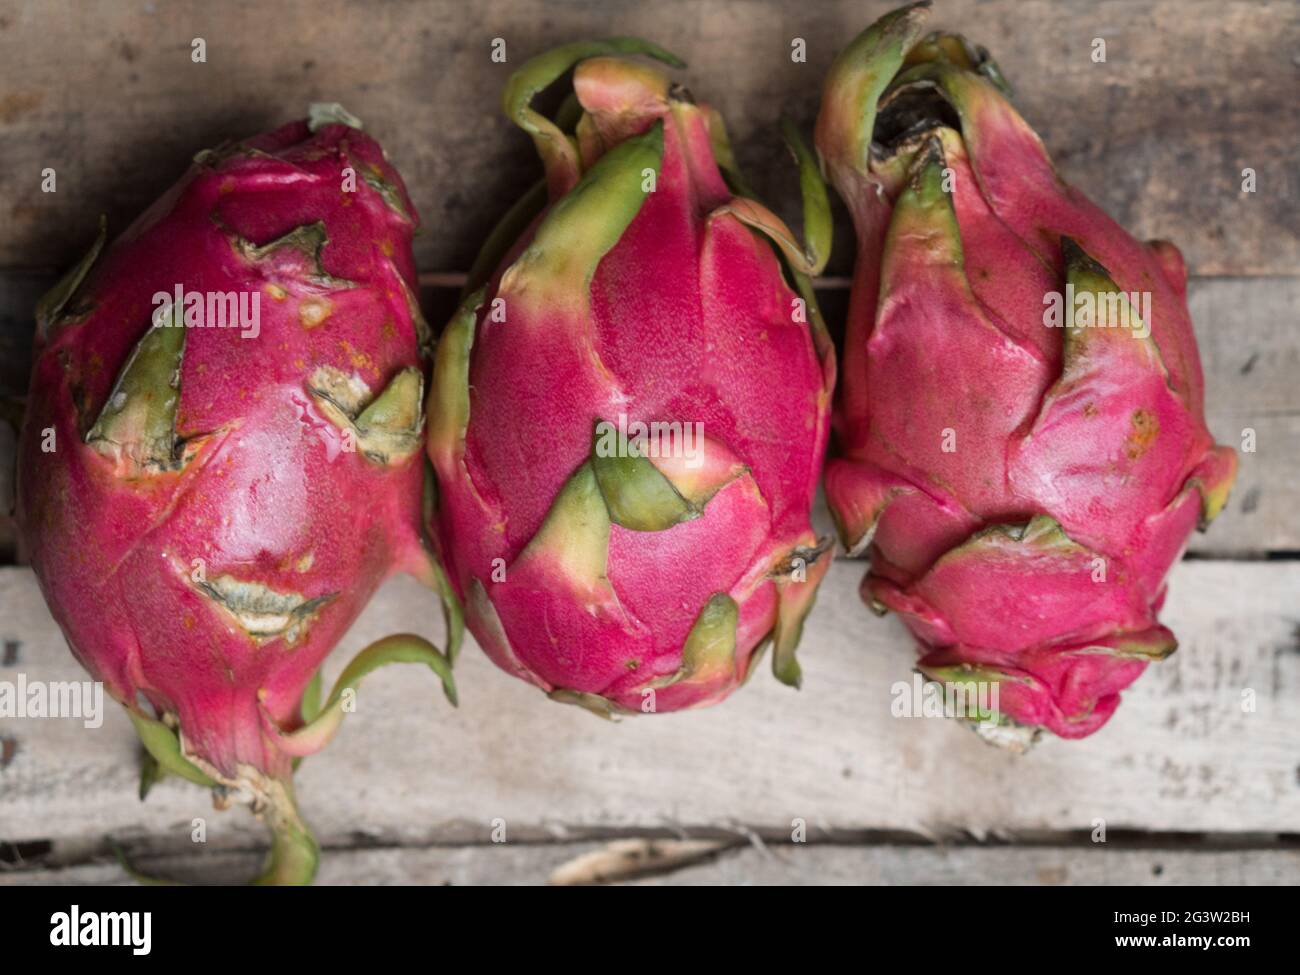 Dragon fruit on the wooden table Stock Photo